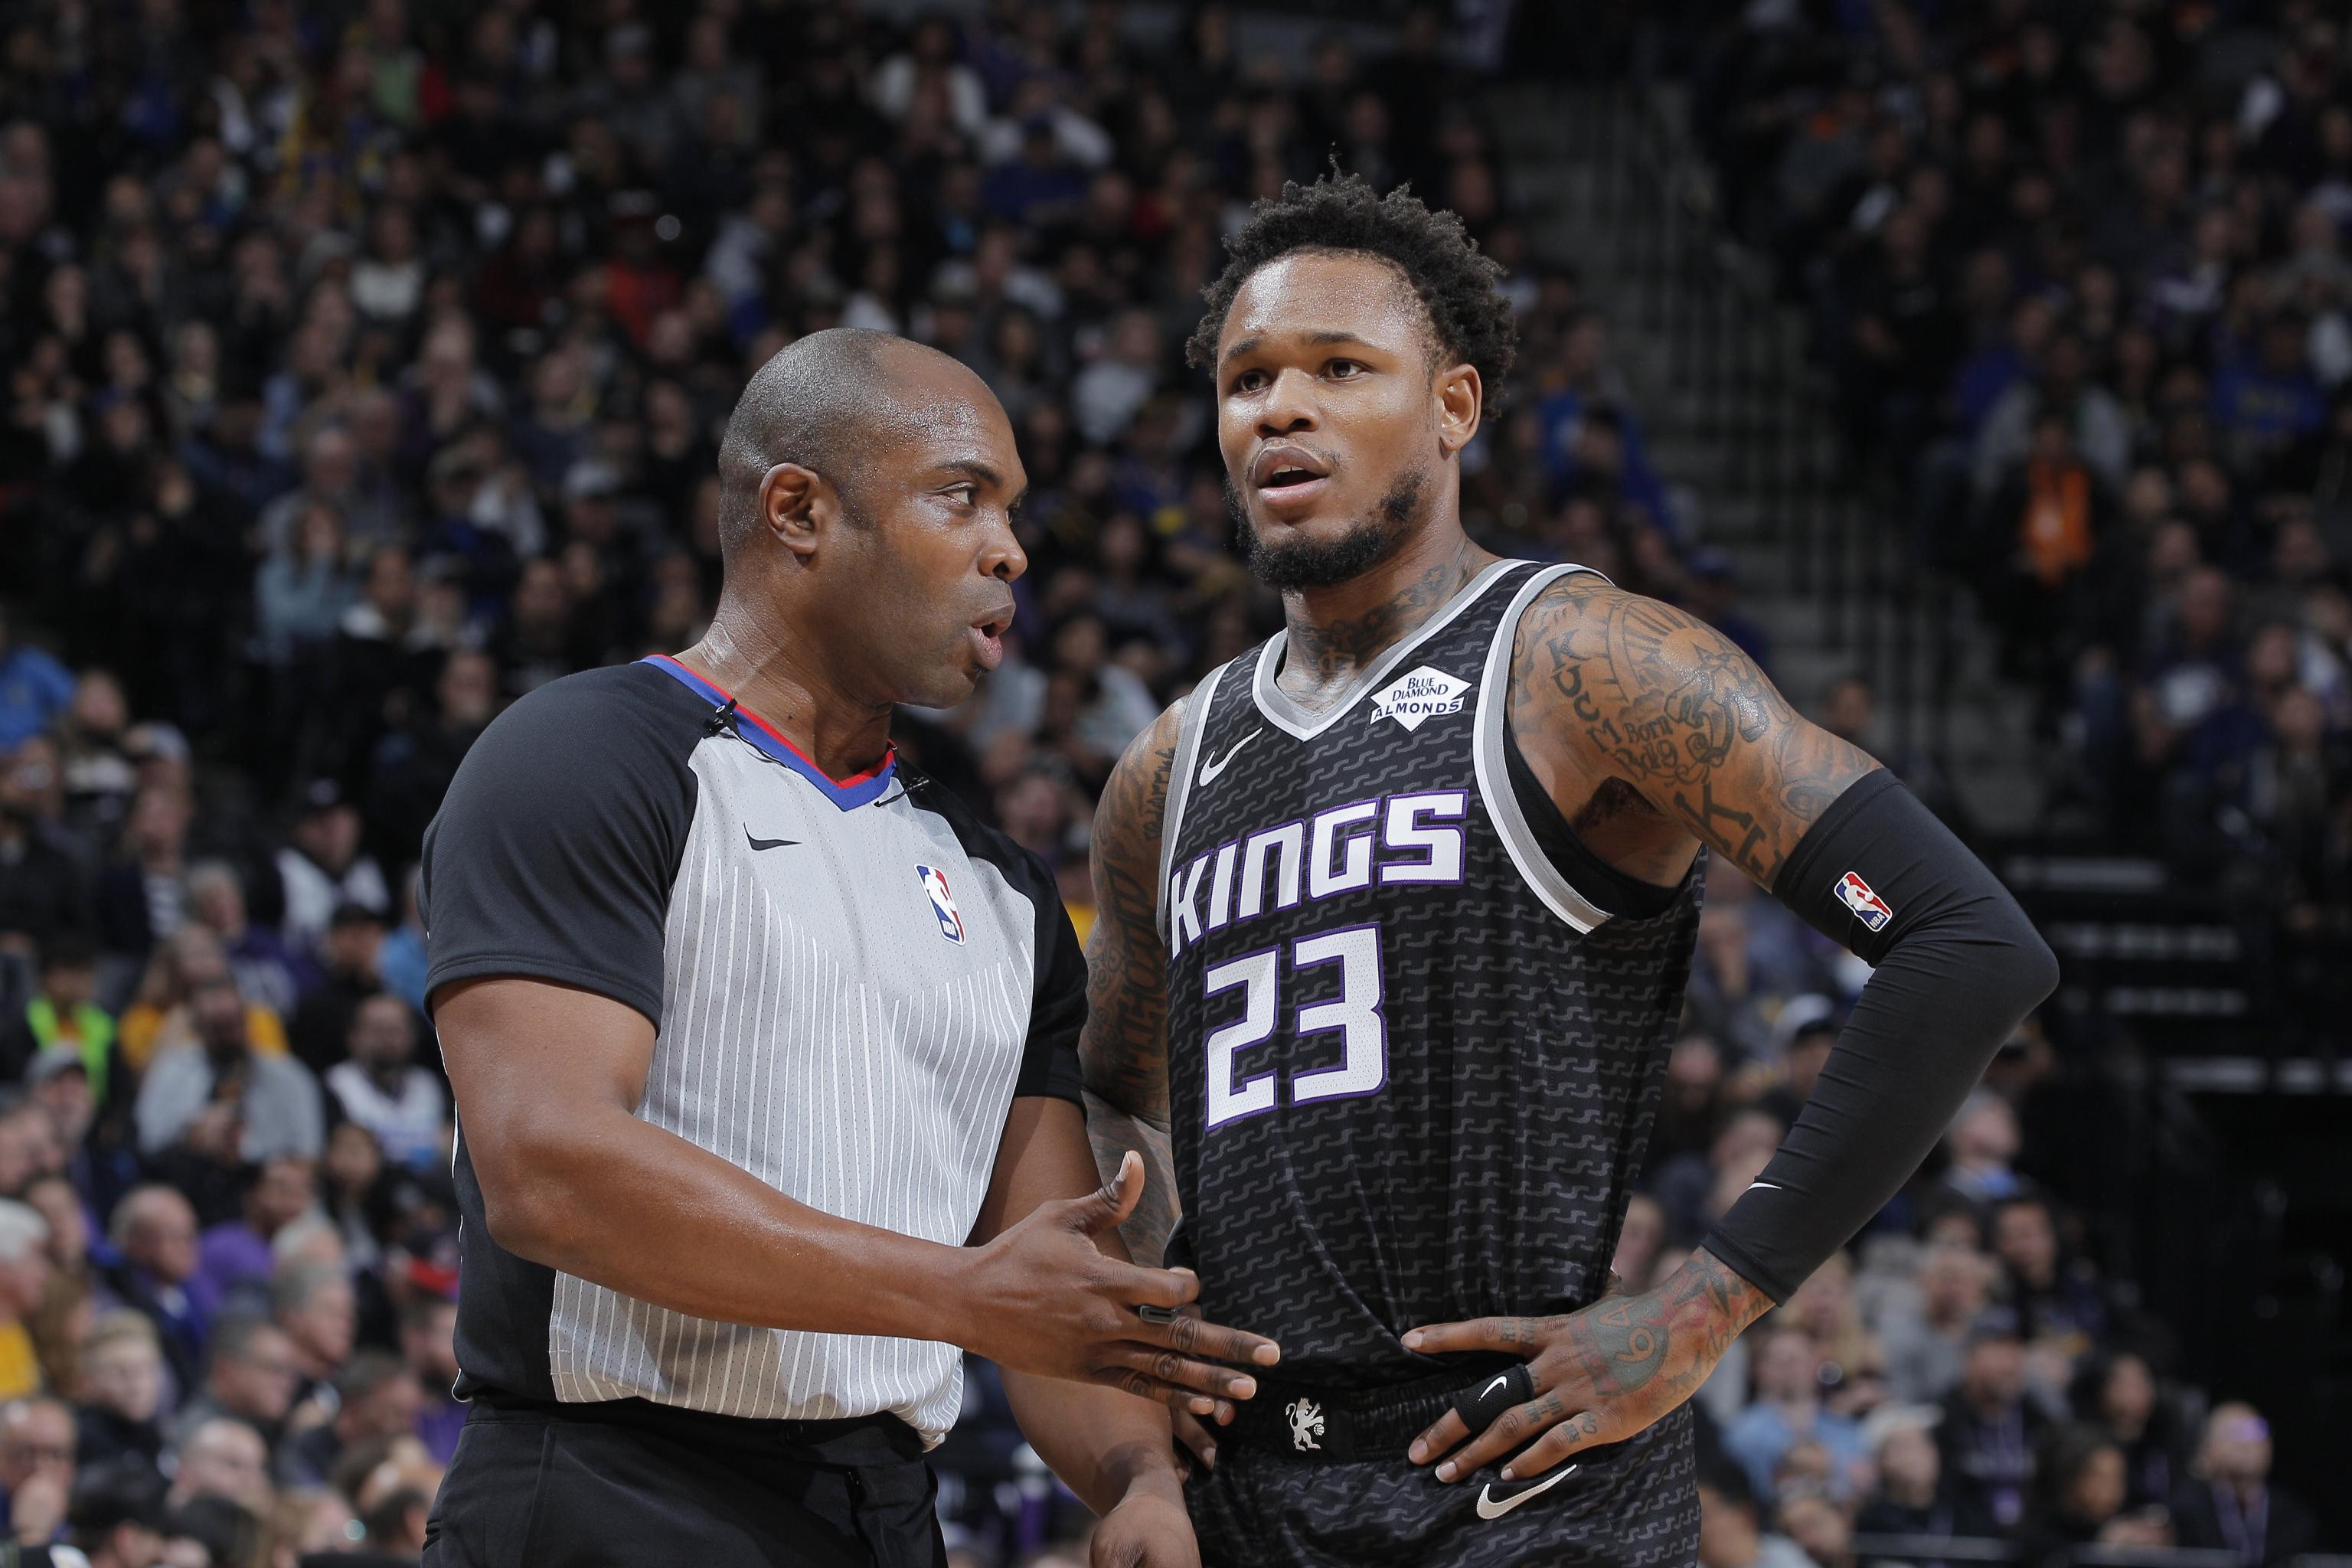 Ben Mclemore Rockets Agree To Reported 2 Year Contract With Partial Guarantees Bleacher Report Latest News Videos And Highlights